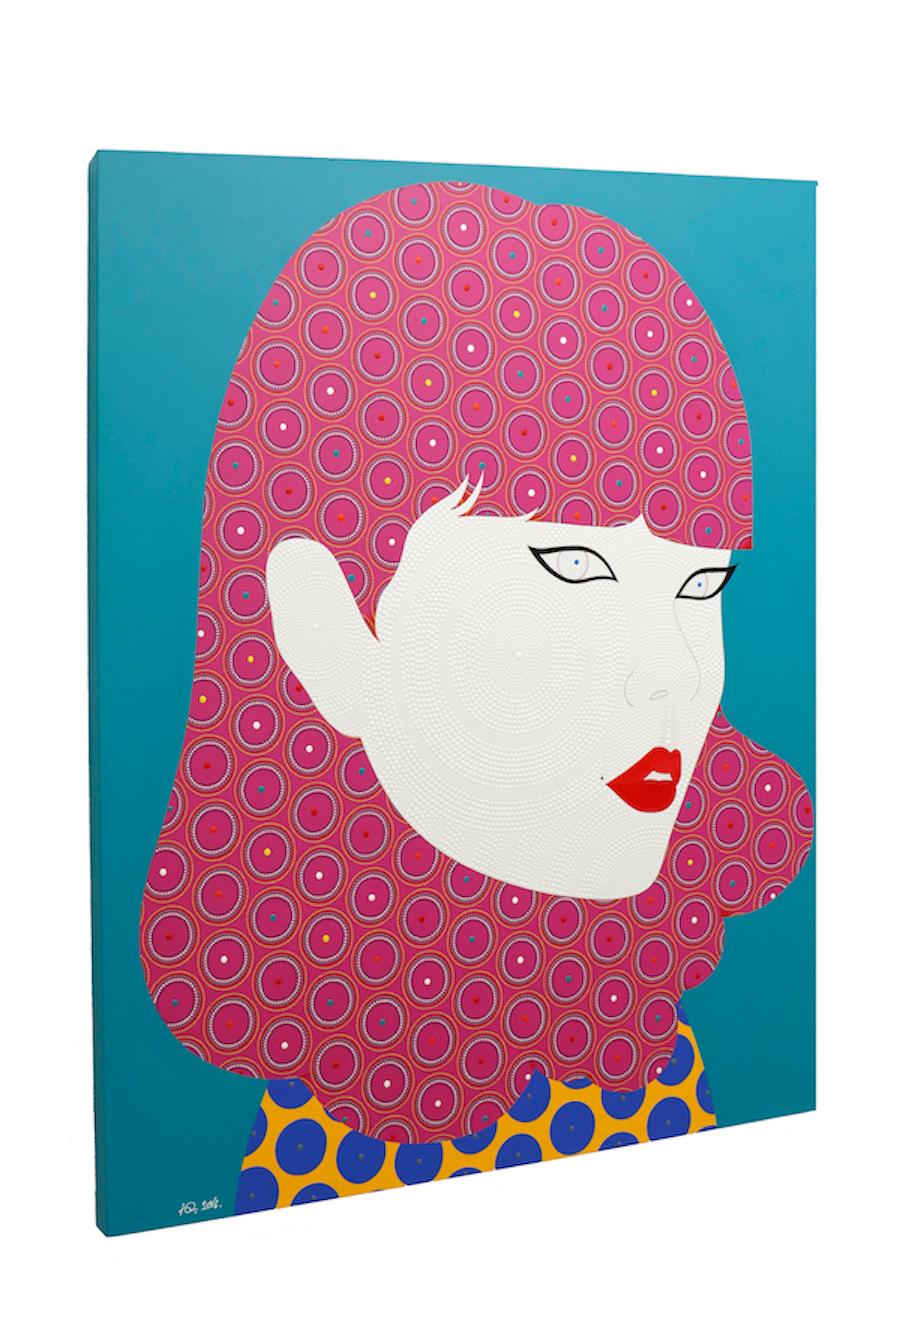 Carin - Contemporary, woman portrait, acrylic, dot, pop art, pink, turquoise  - Pink Portrait Painting by Chamnan Chongpaiboon